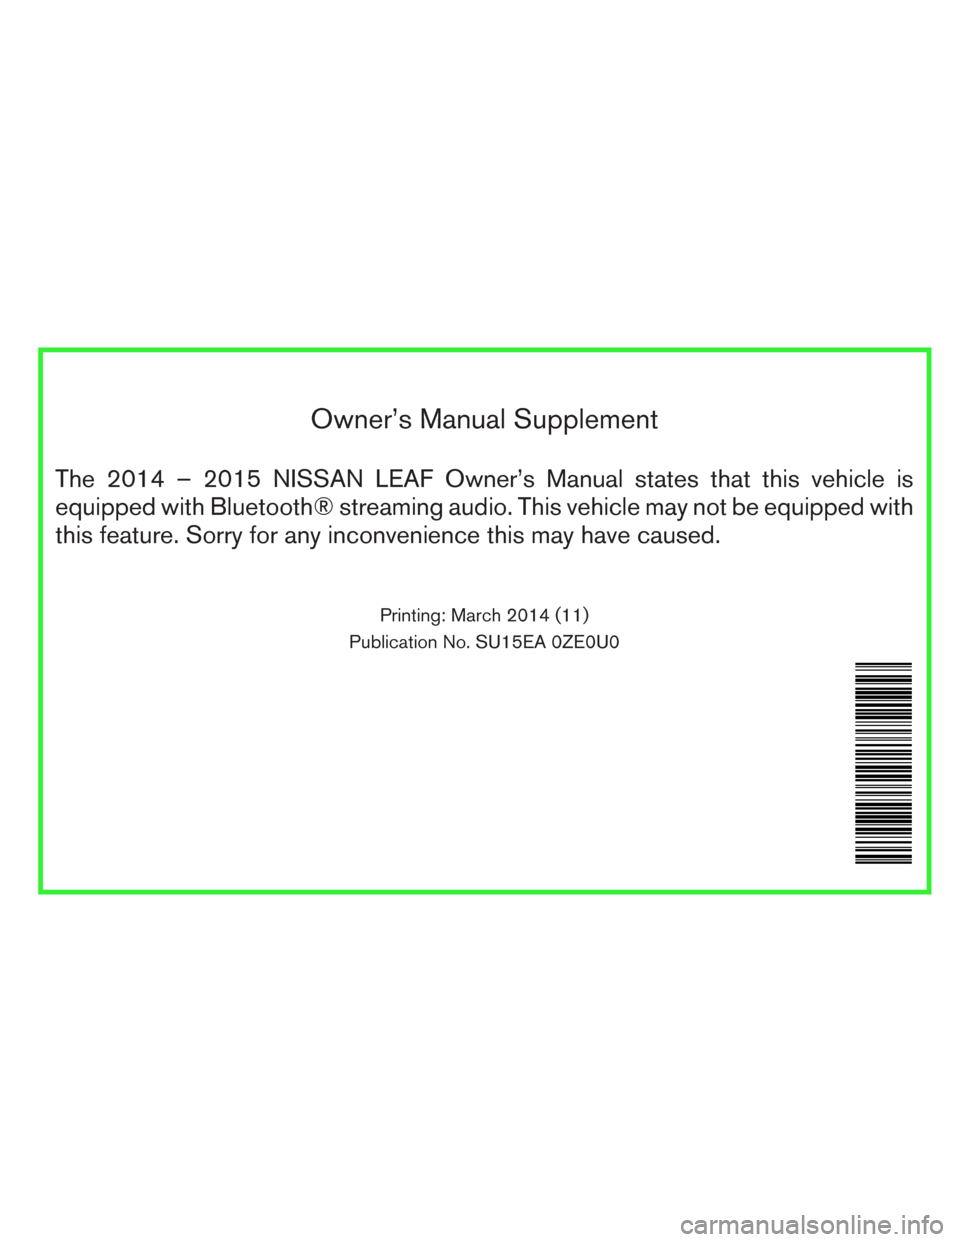 NISSAN LEAF 2014 1.G Owners Manual Owner’s Manual Supplement
The 2014 – 2015 NISSAN LEAF Owner’s Manual states that this vehicle is
equipped with Bluetooth® streaming audio. This vehicle may not be equipped with
this feature. So